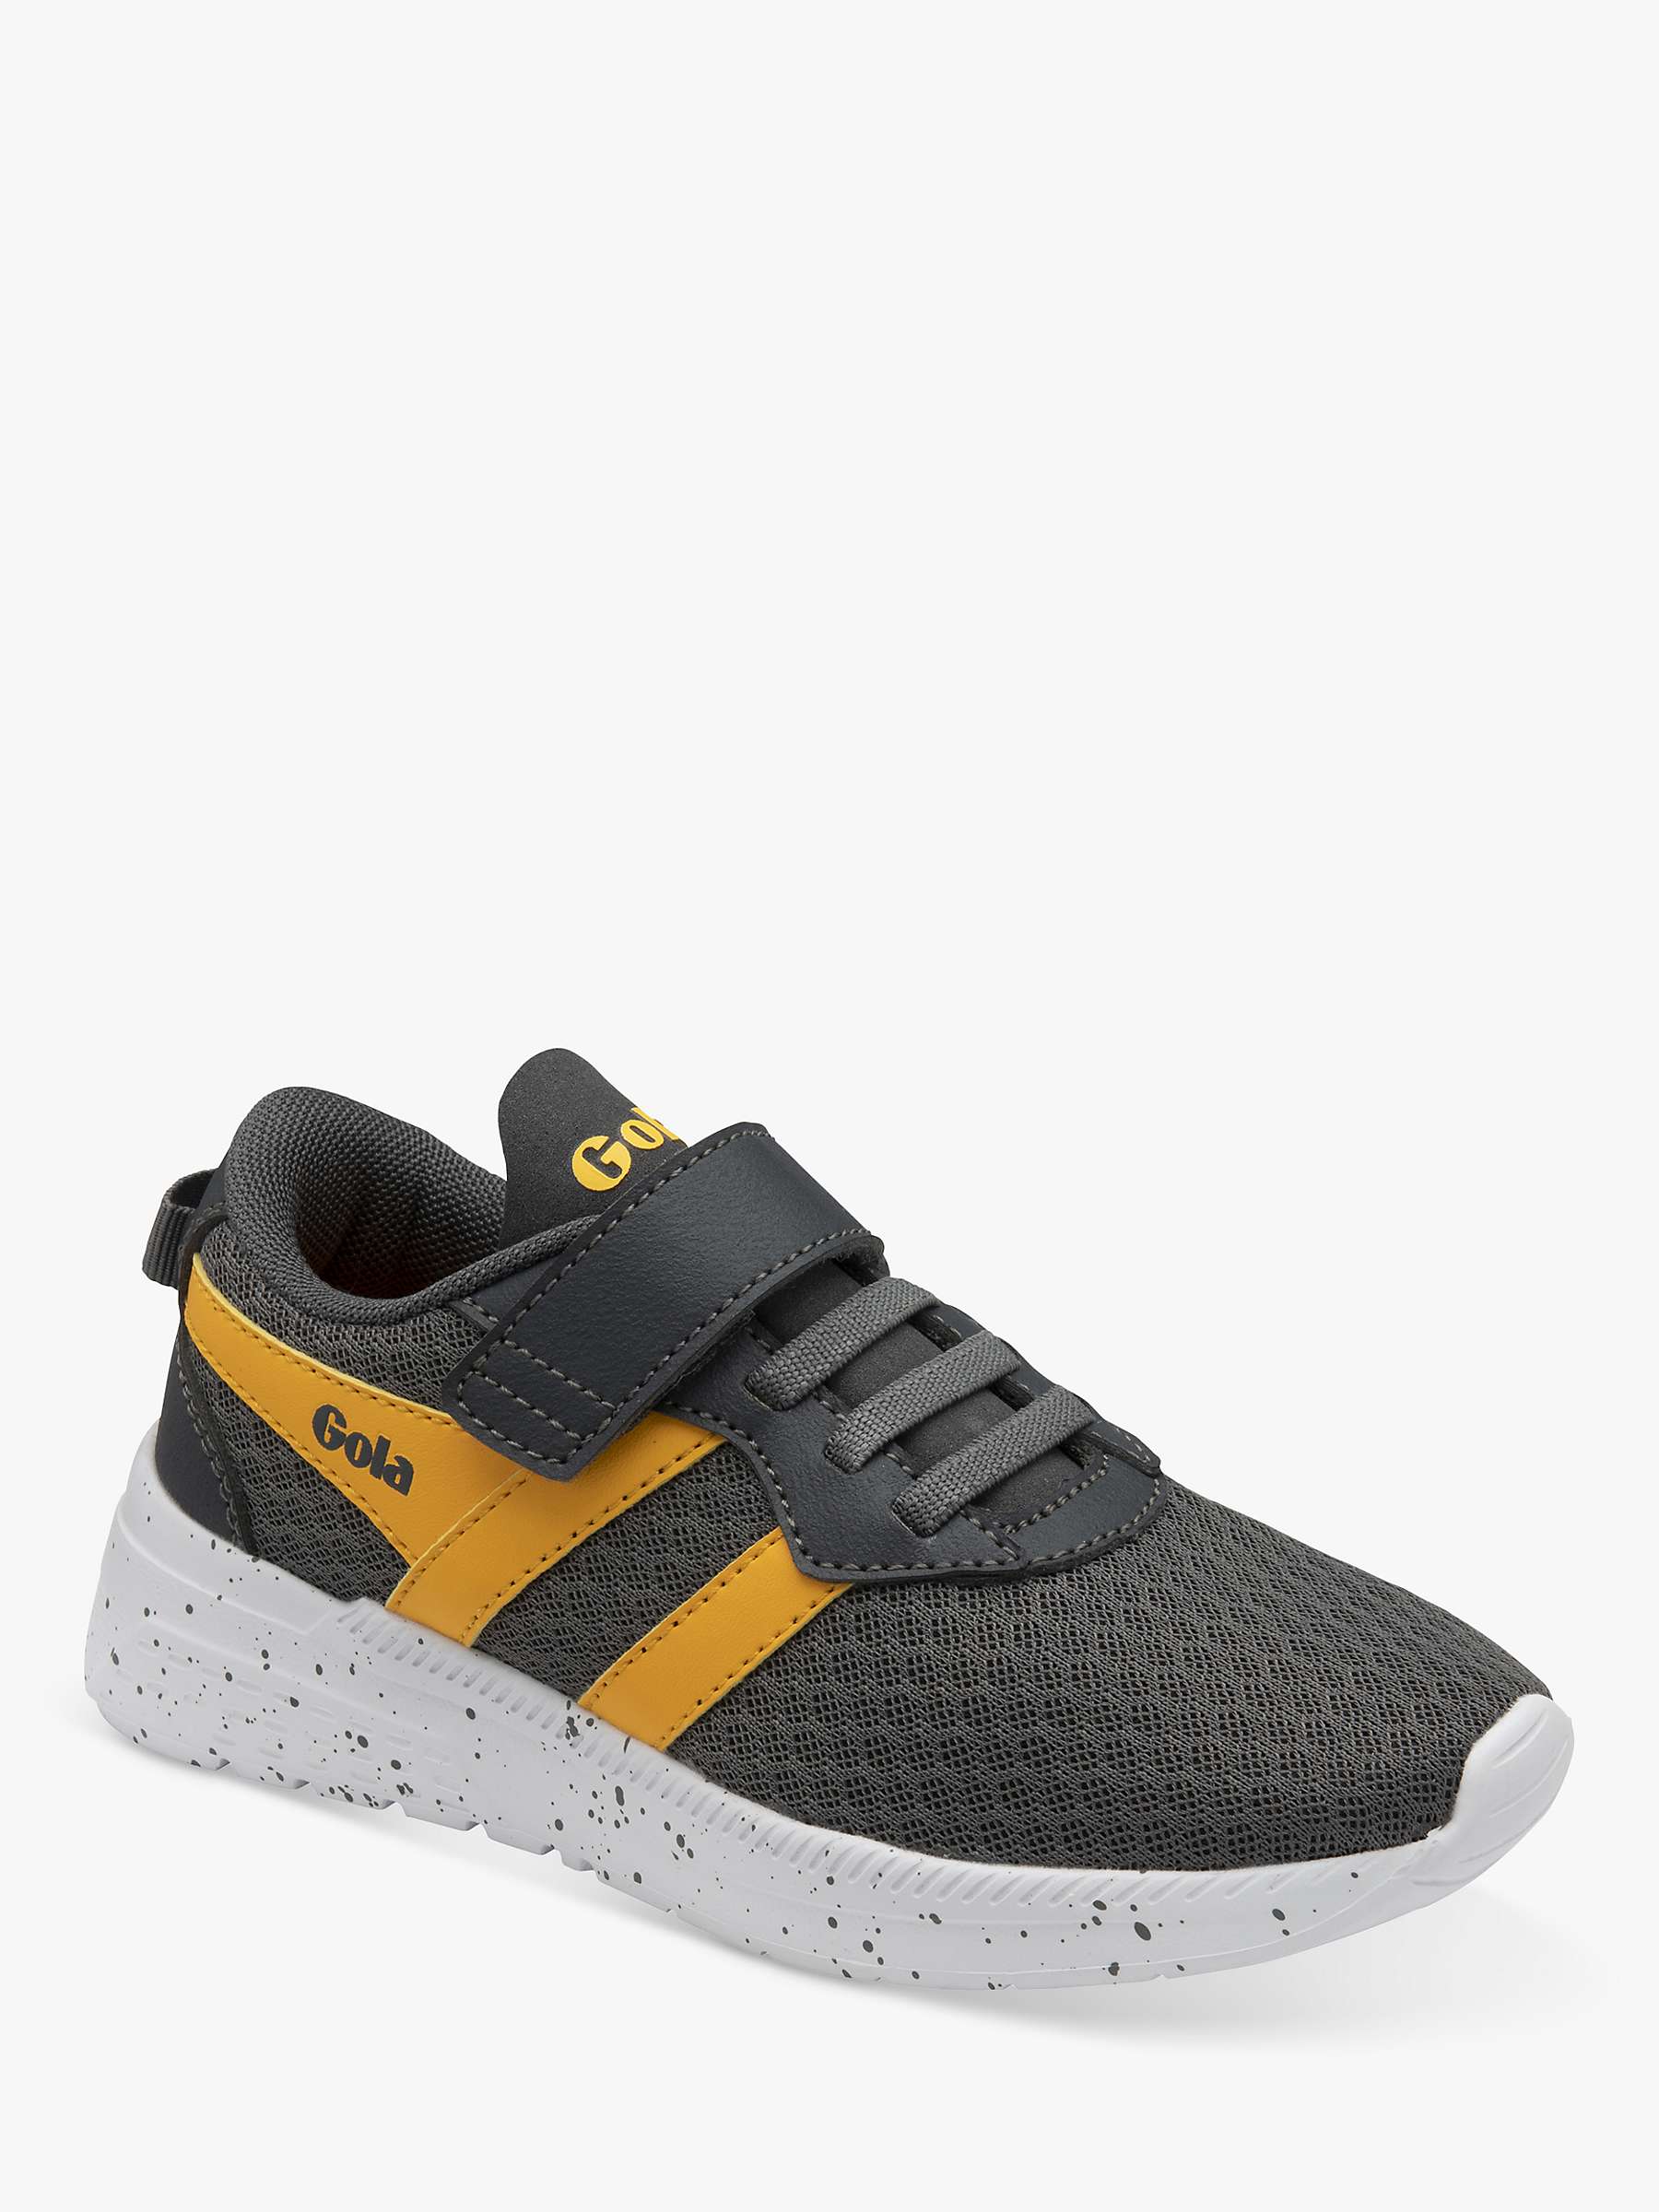 Buy Gola Kids' Performance Scorpion QF Trainers Online at johnlewis.com